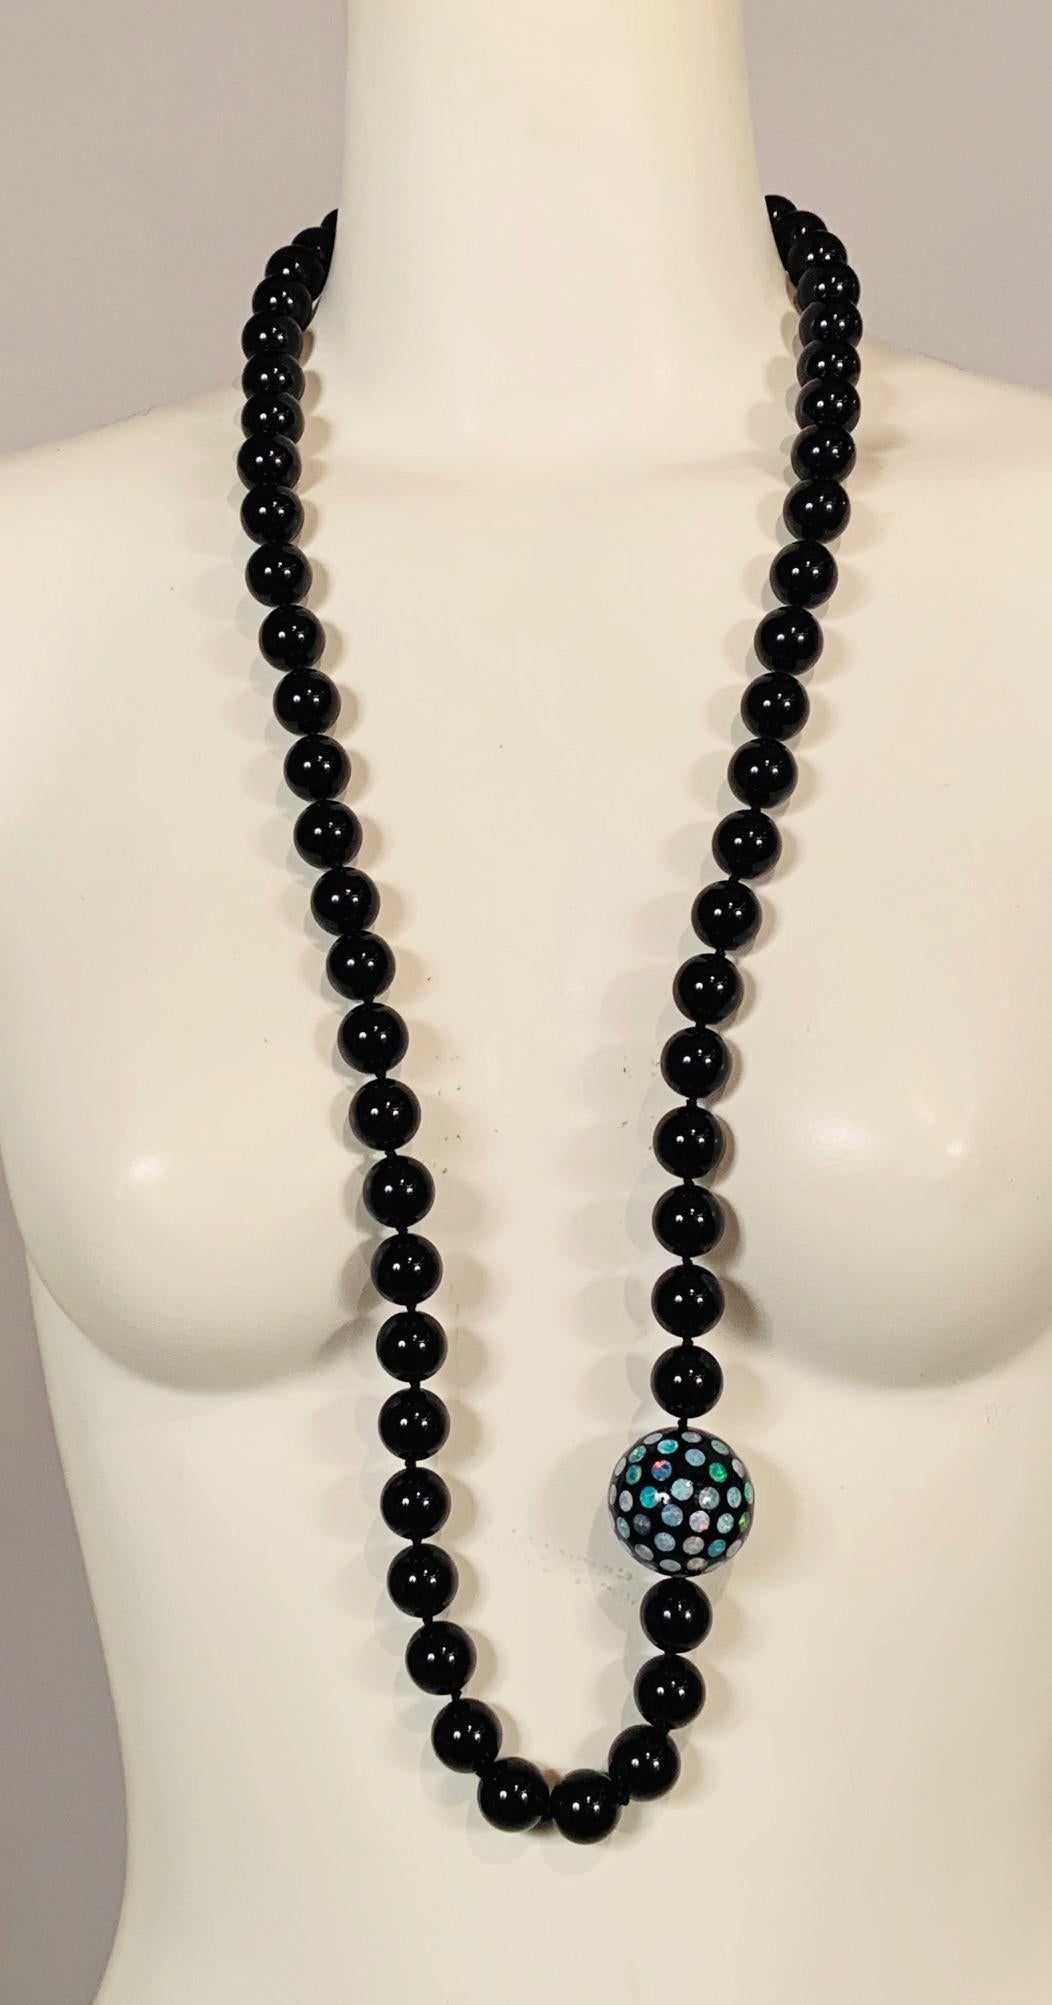 Glistening onyx beads are embellished with a large scale onyx bead studded with brilliant eye catching Australian opals.  The opals sparkle in the light beautifully and the colors range from pale blue, violet, turquoise to pink and deep red. The